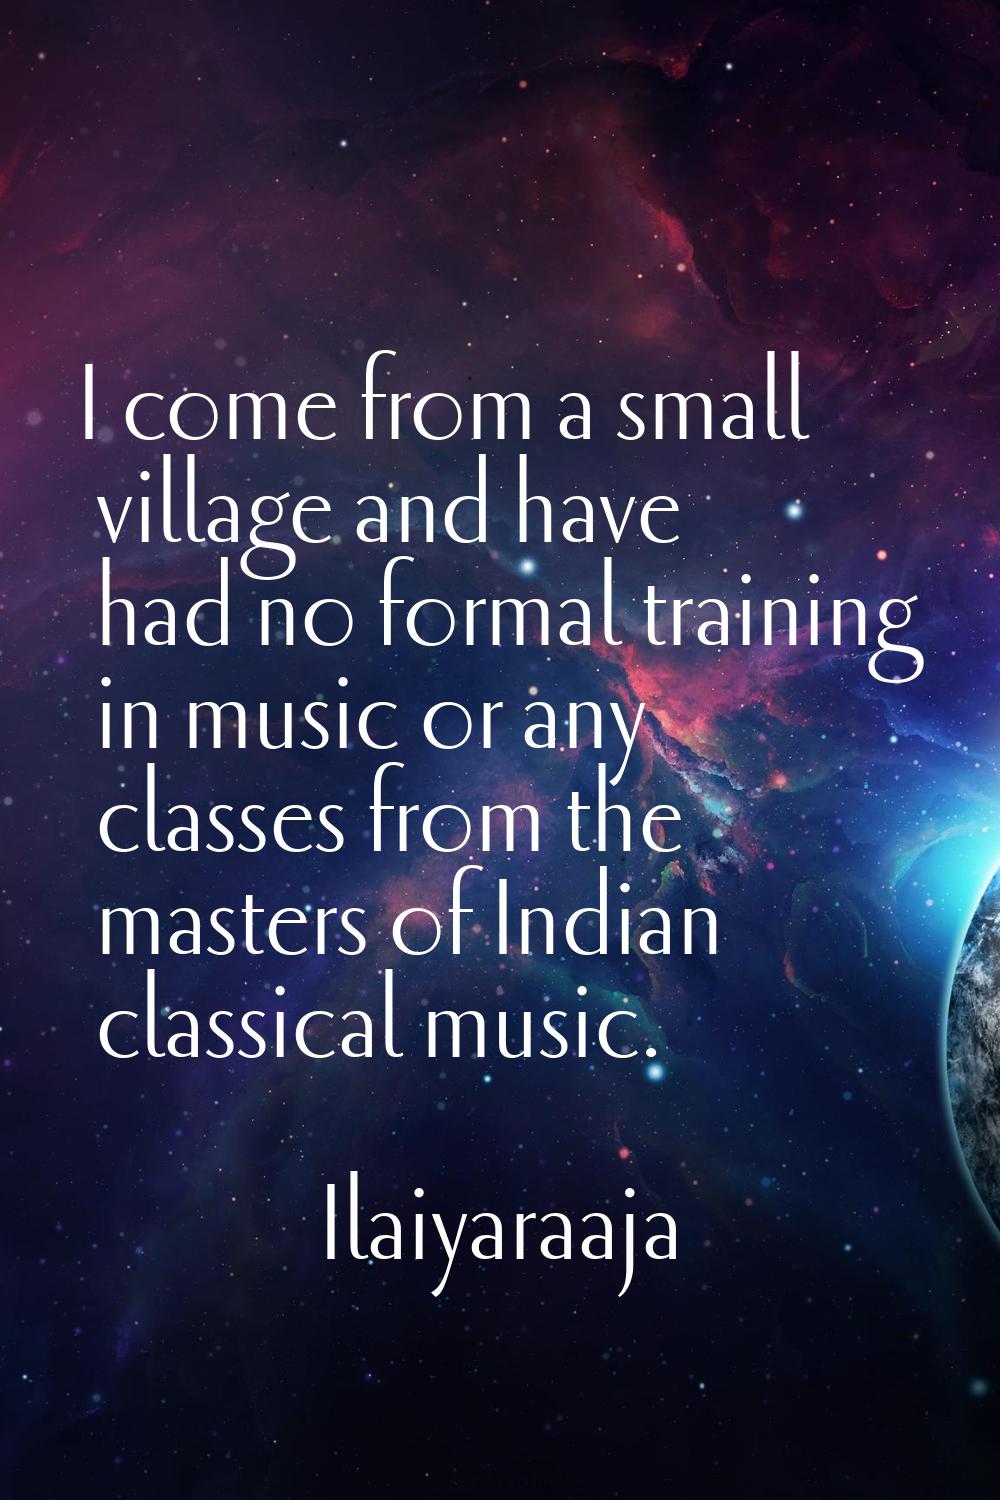 I come from a small village and have had no formal training in music or any classes from the master